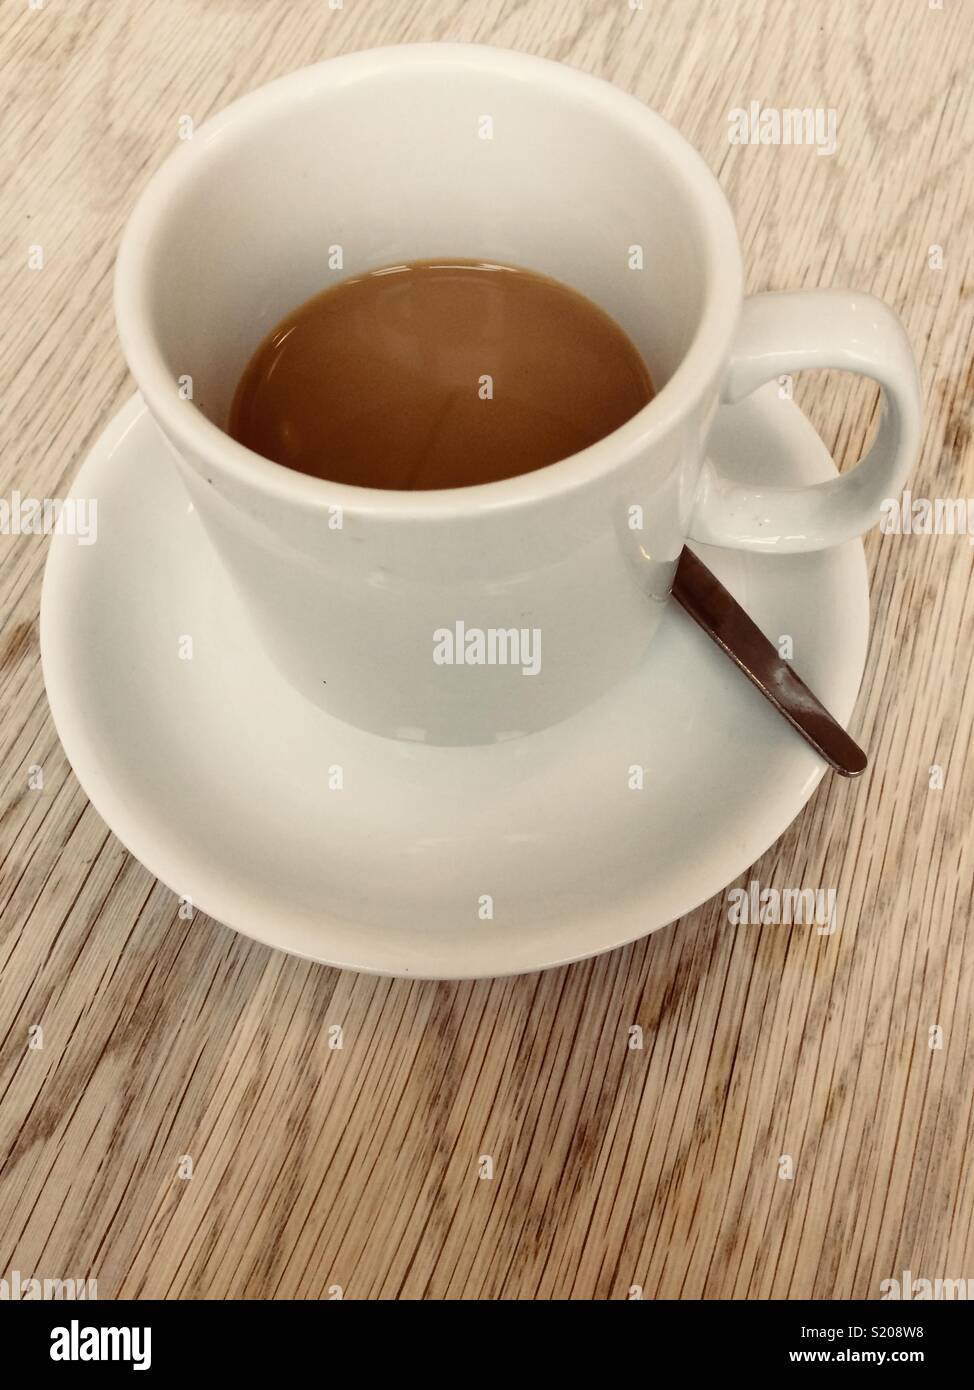 Half a cup of coffee on a wooden table Stock Photo